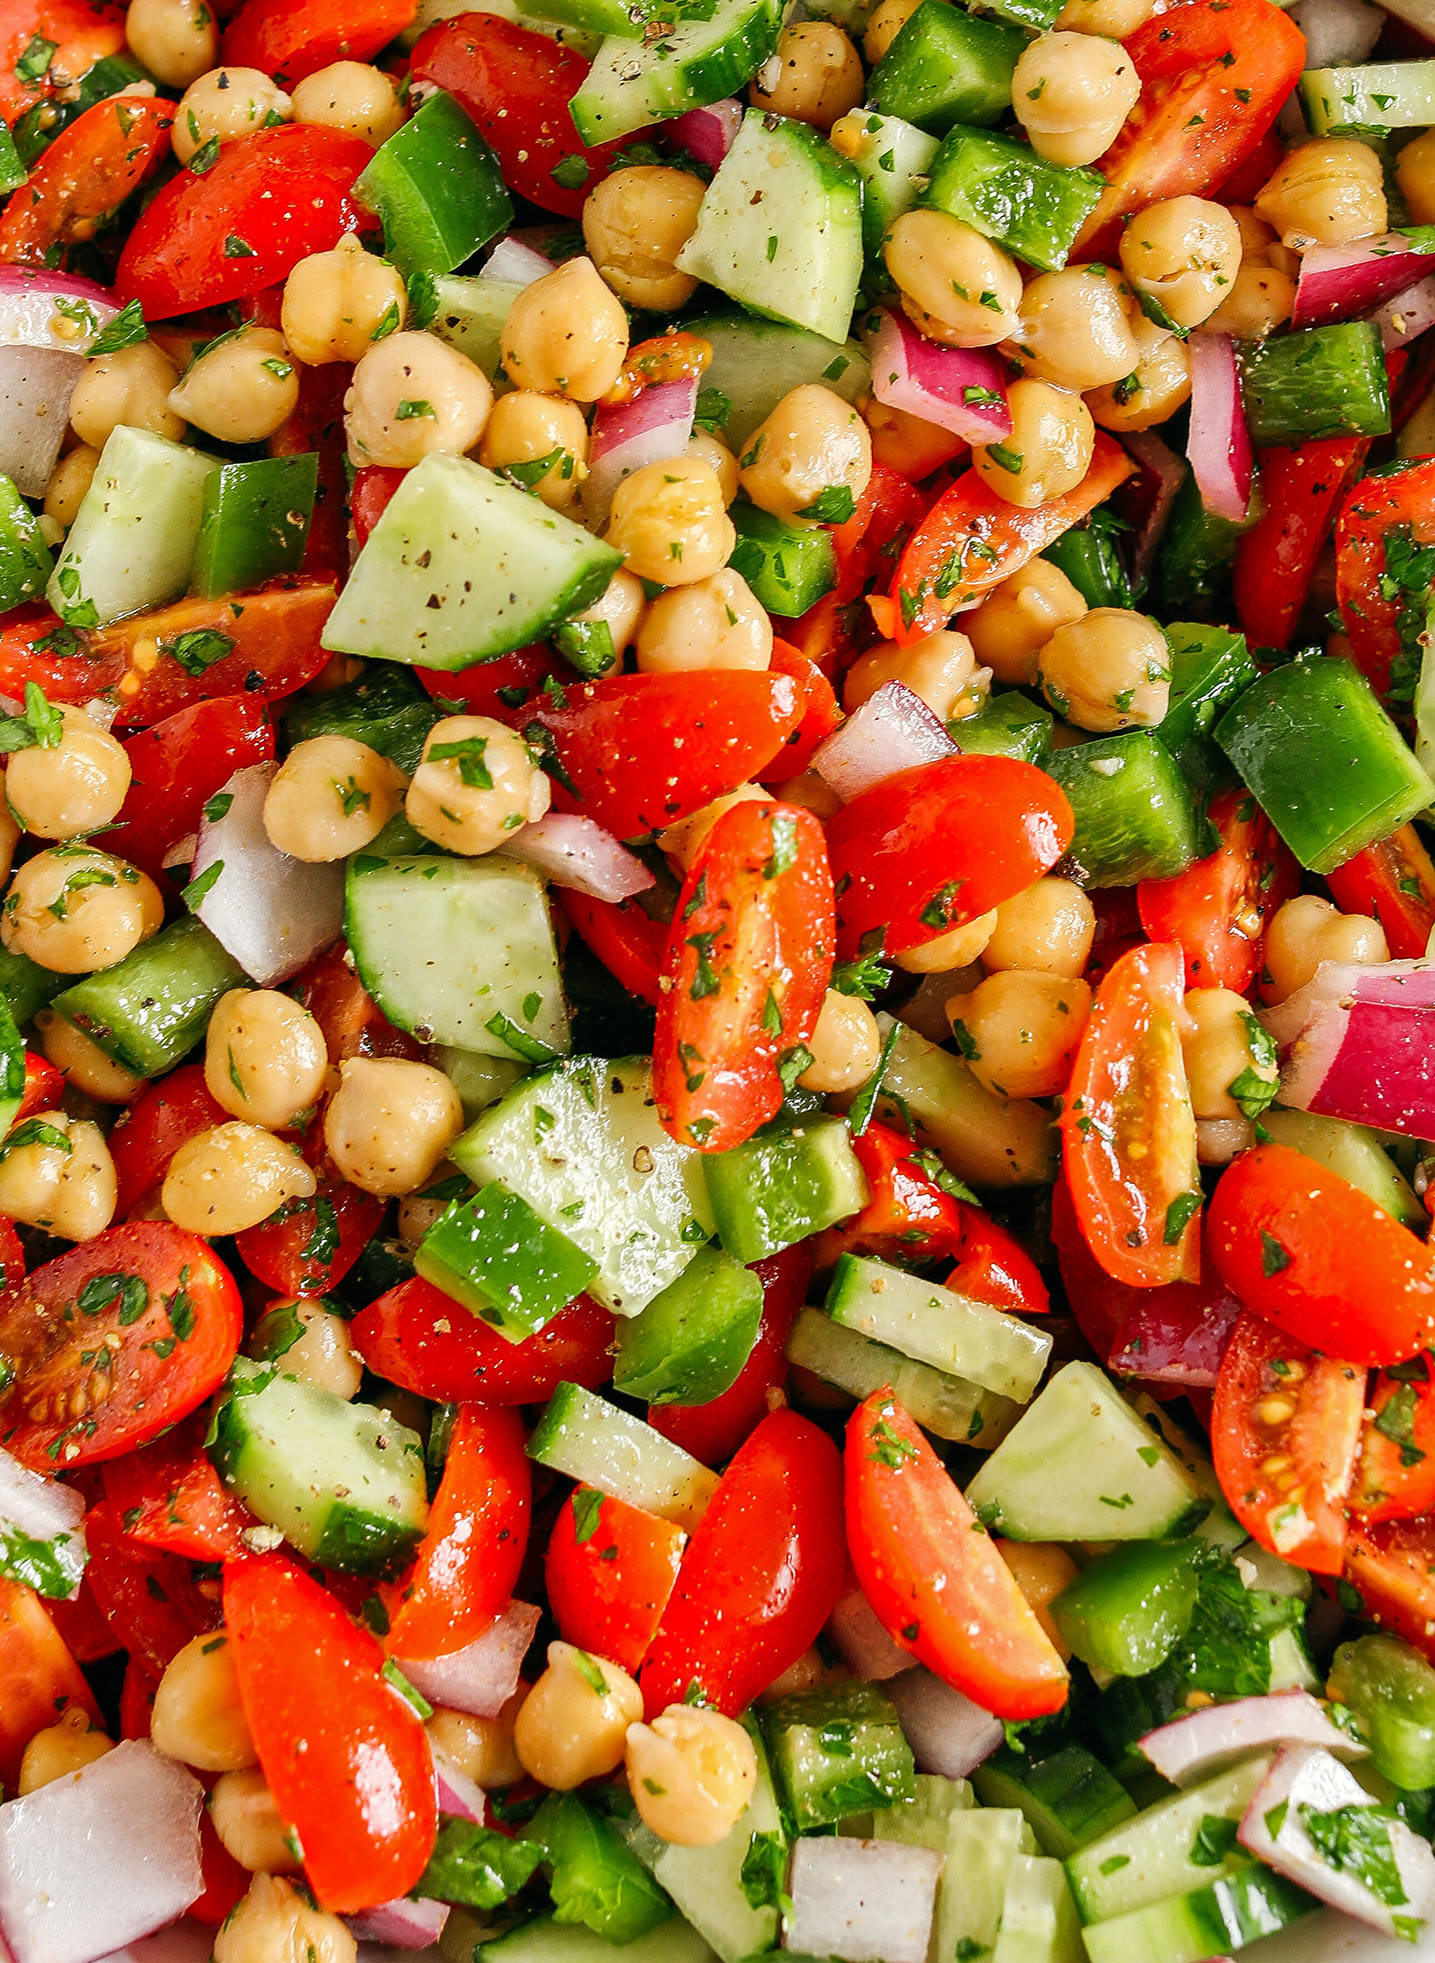 This Tomato, Cucumber and Chickpea Salad is a delicious summer staple made with fresh tomatoes, crisp cucumbers, chickpeas, red onion, and green bell pepper all tossed with a bright lemon vinaigrette!  Easy, healthy and the perfect side dish with grilled chicken, fish or steak!